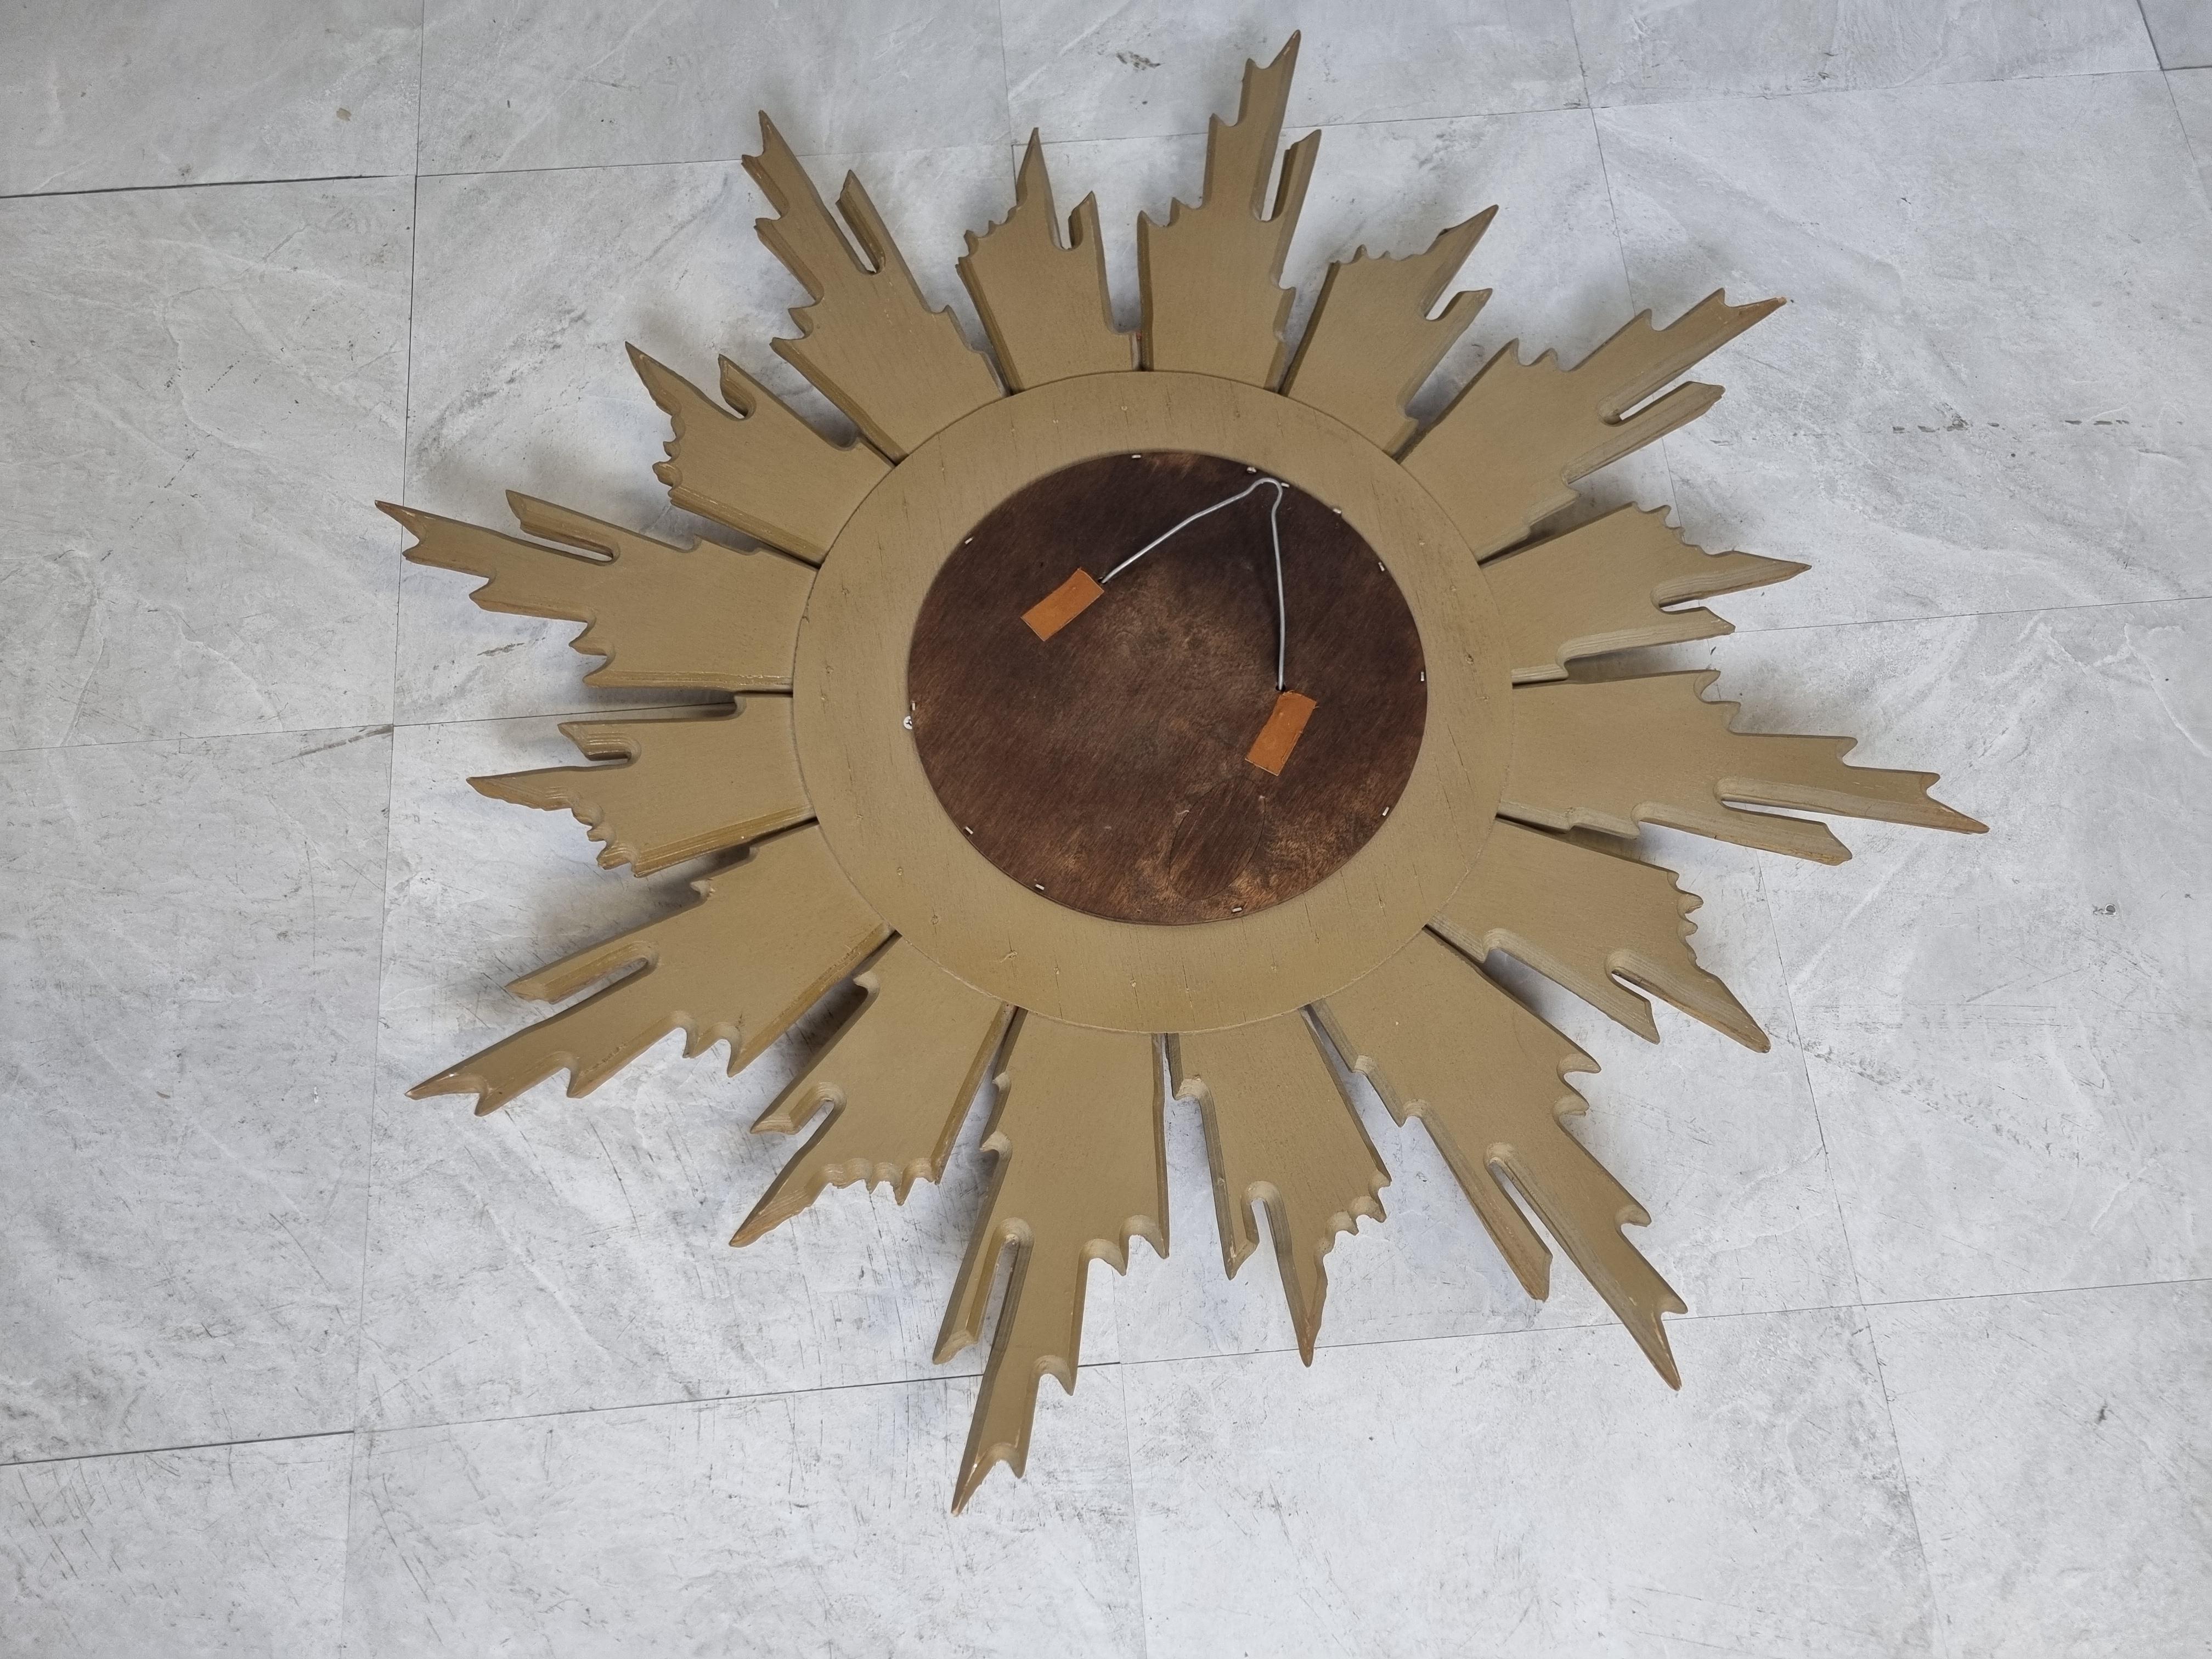 Golden resin sunburst mirror with convex mirror glass.

The golden mirror is in a good condition.

1960s - made in Belgium.

Dimensions:
Diameter: 70cm/27.55